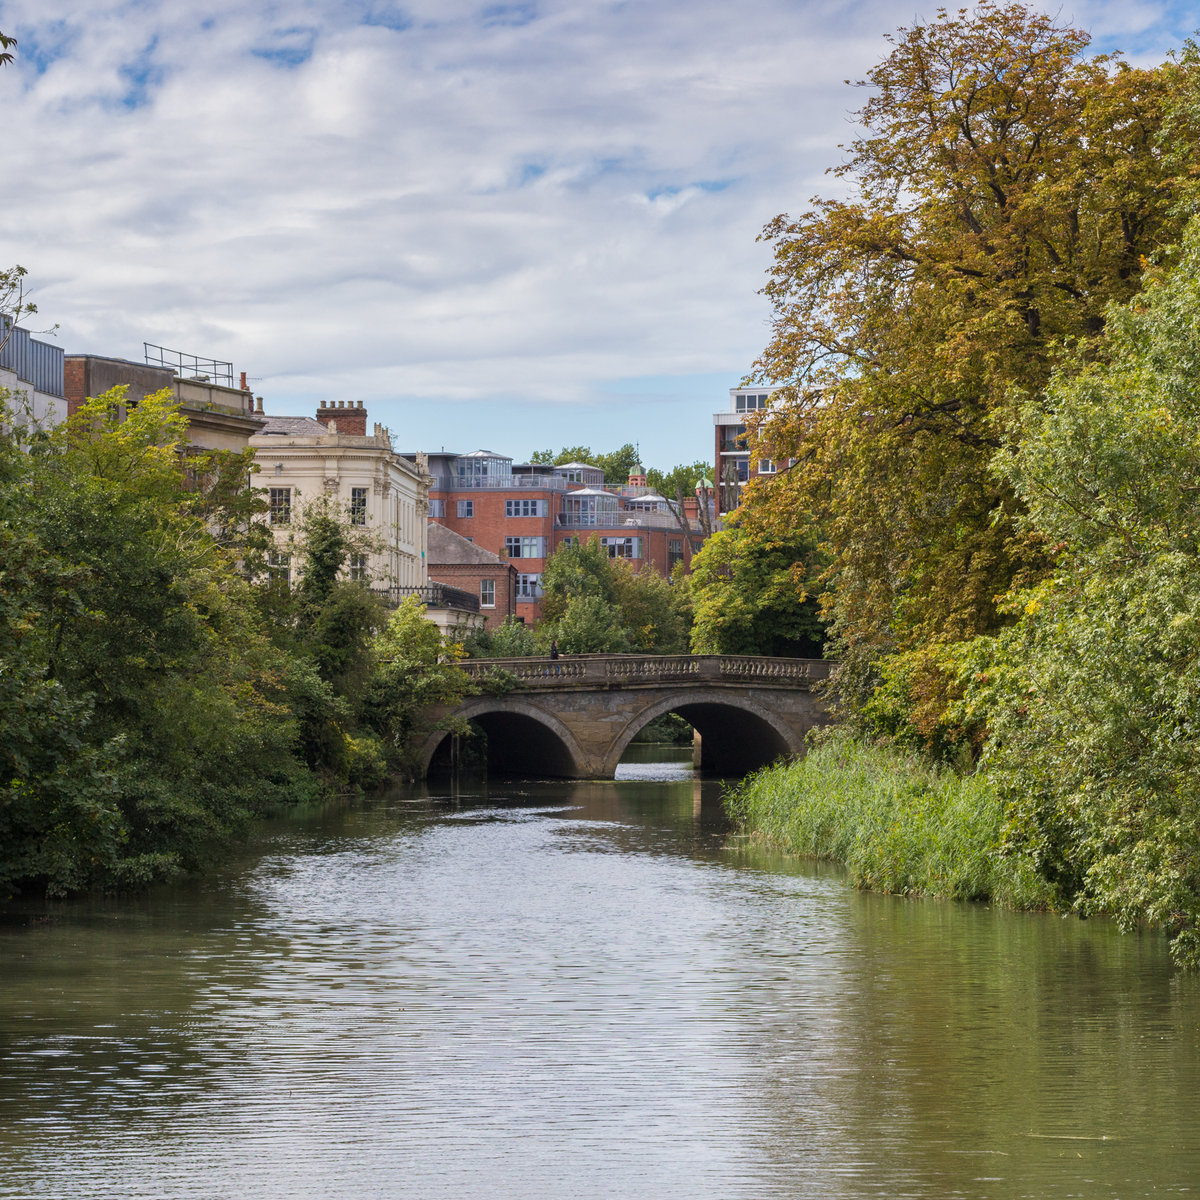 IMAGE: The River Leam in Royal Leamington Spa